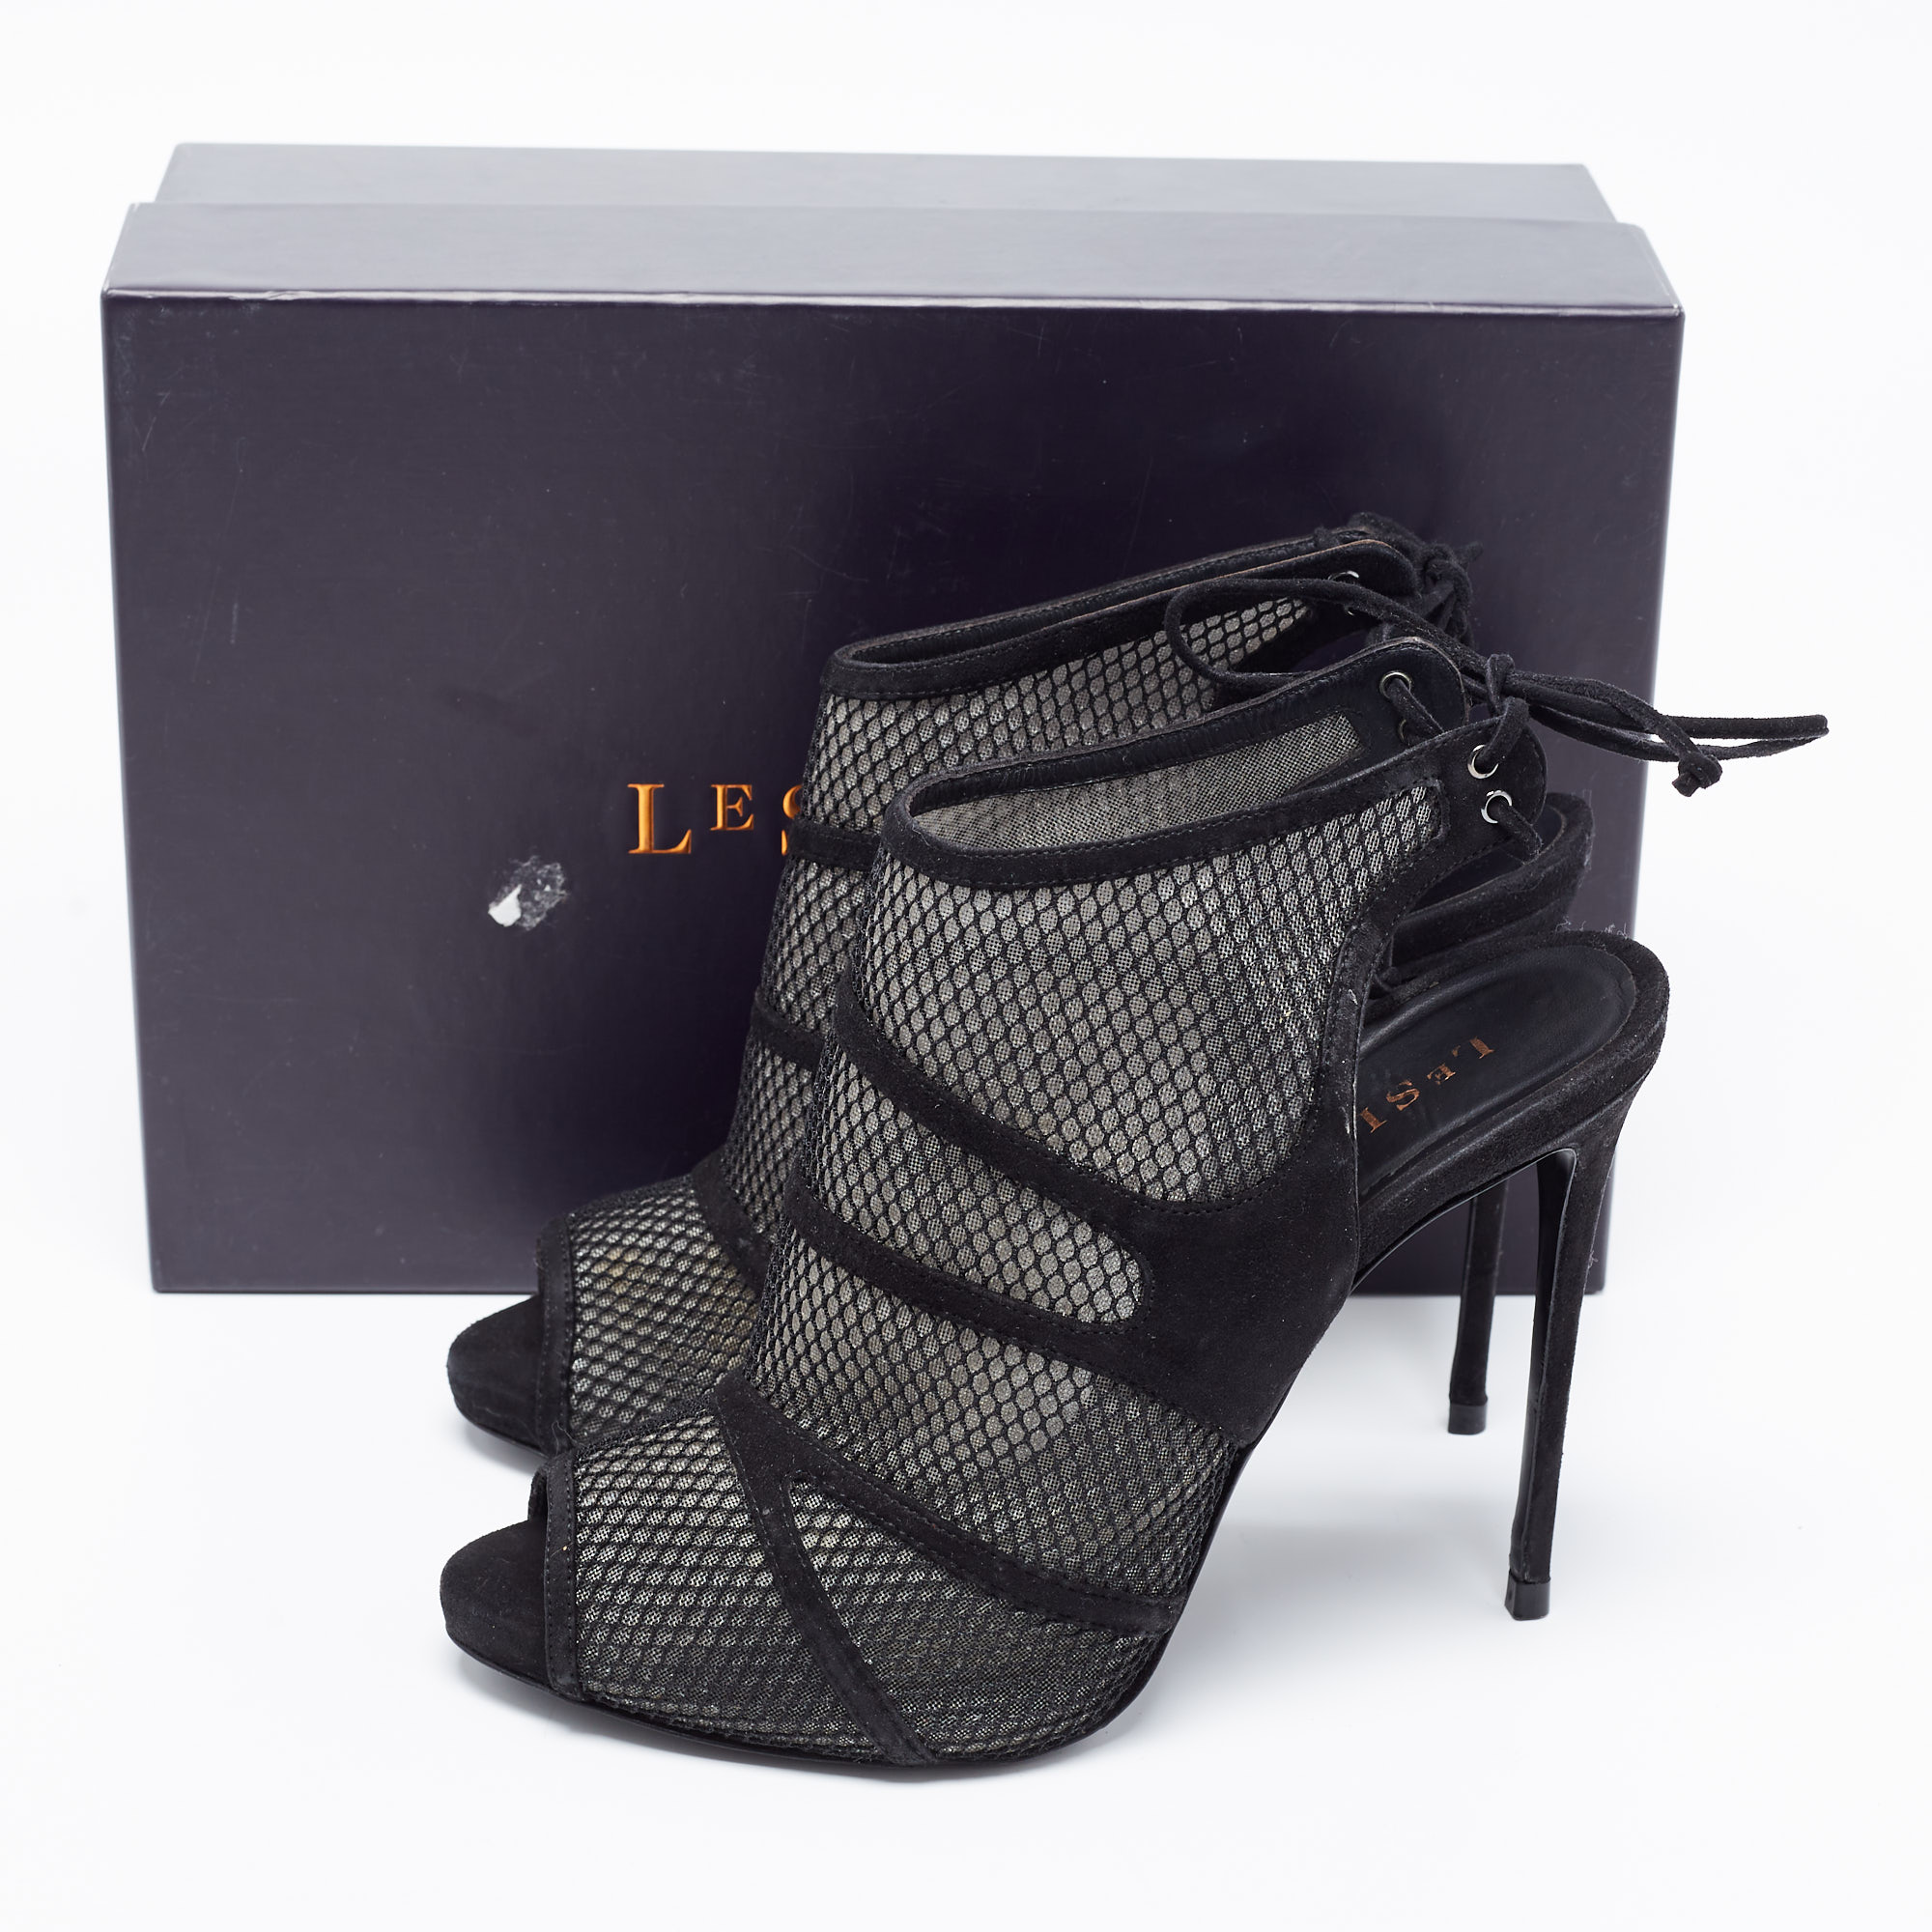 Le Silla Black Suede And Lace Ankle Tie Sandals Size 39.5